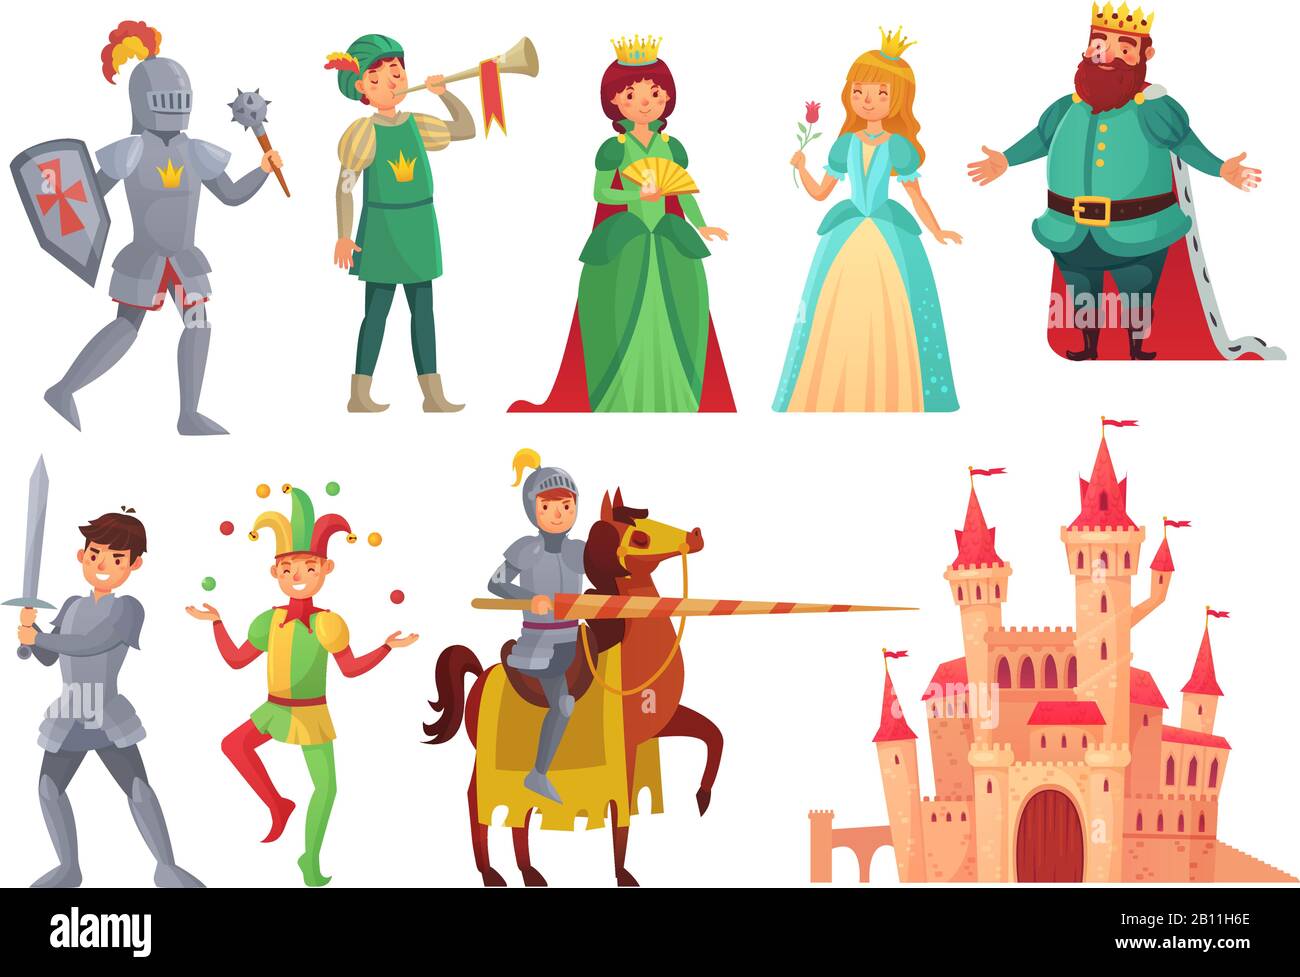 Medieval characters. Royal knight with lance on horseback, princess, kingdom king and queen isolated vector character set Stock Vector